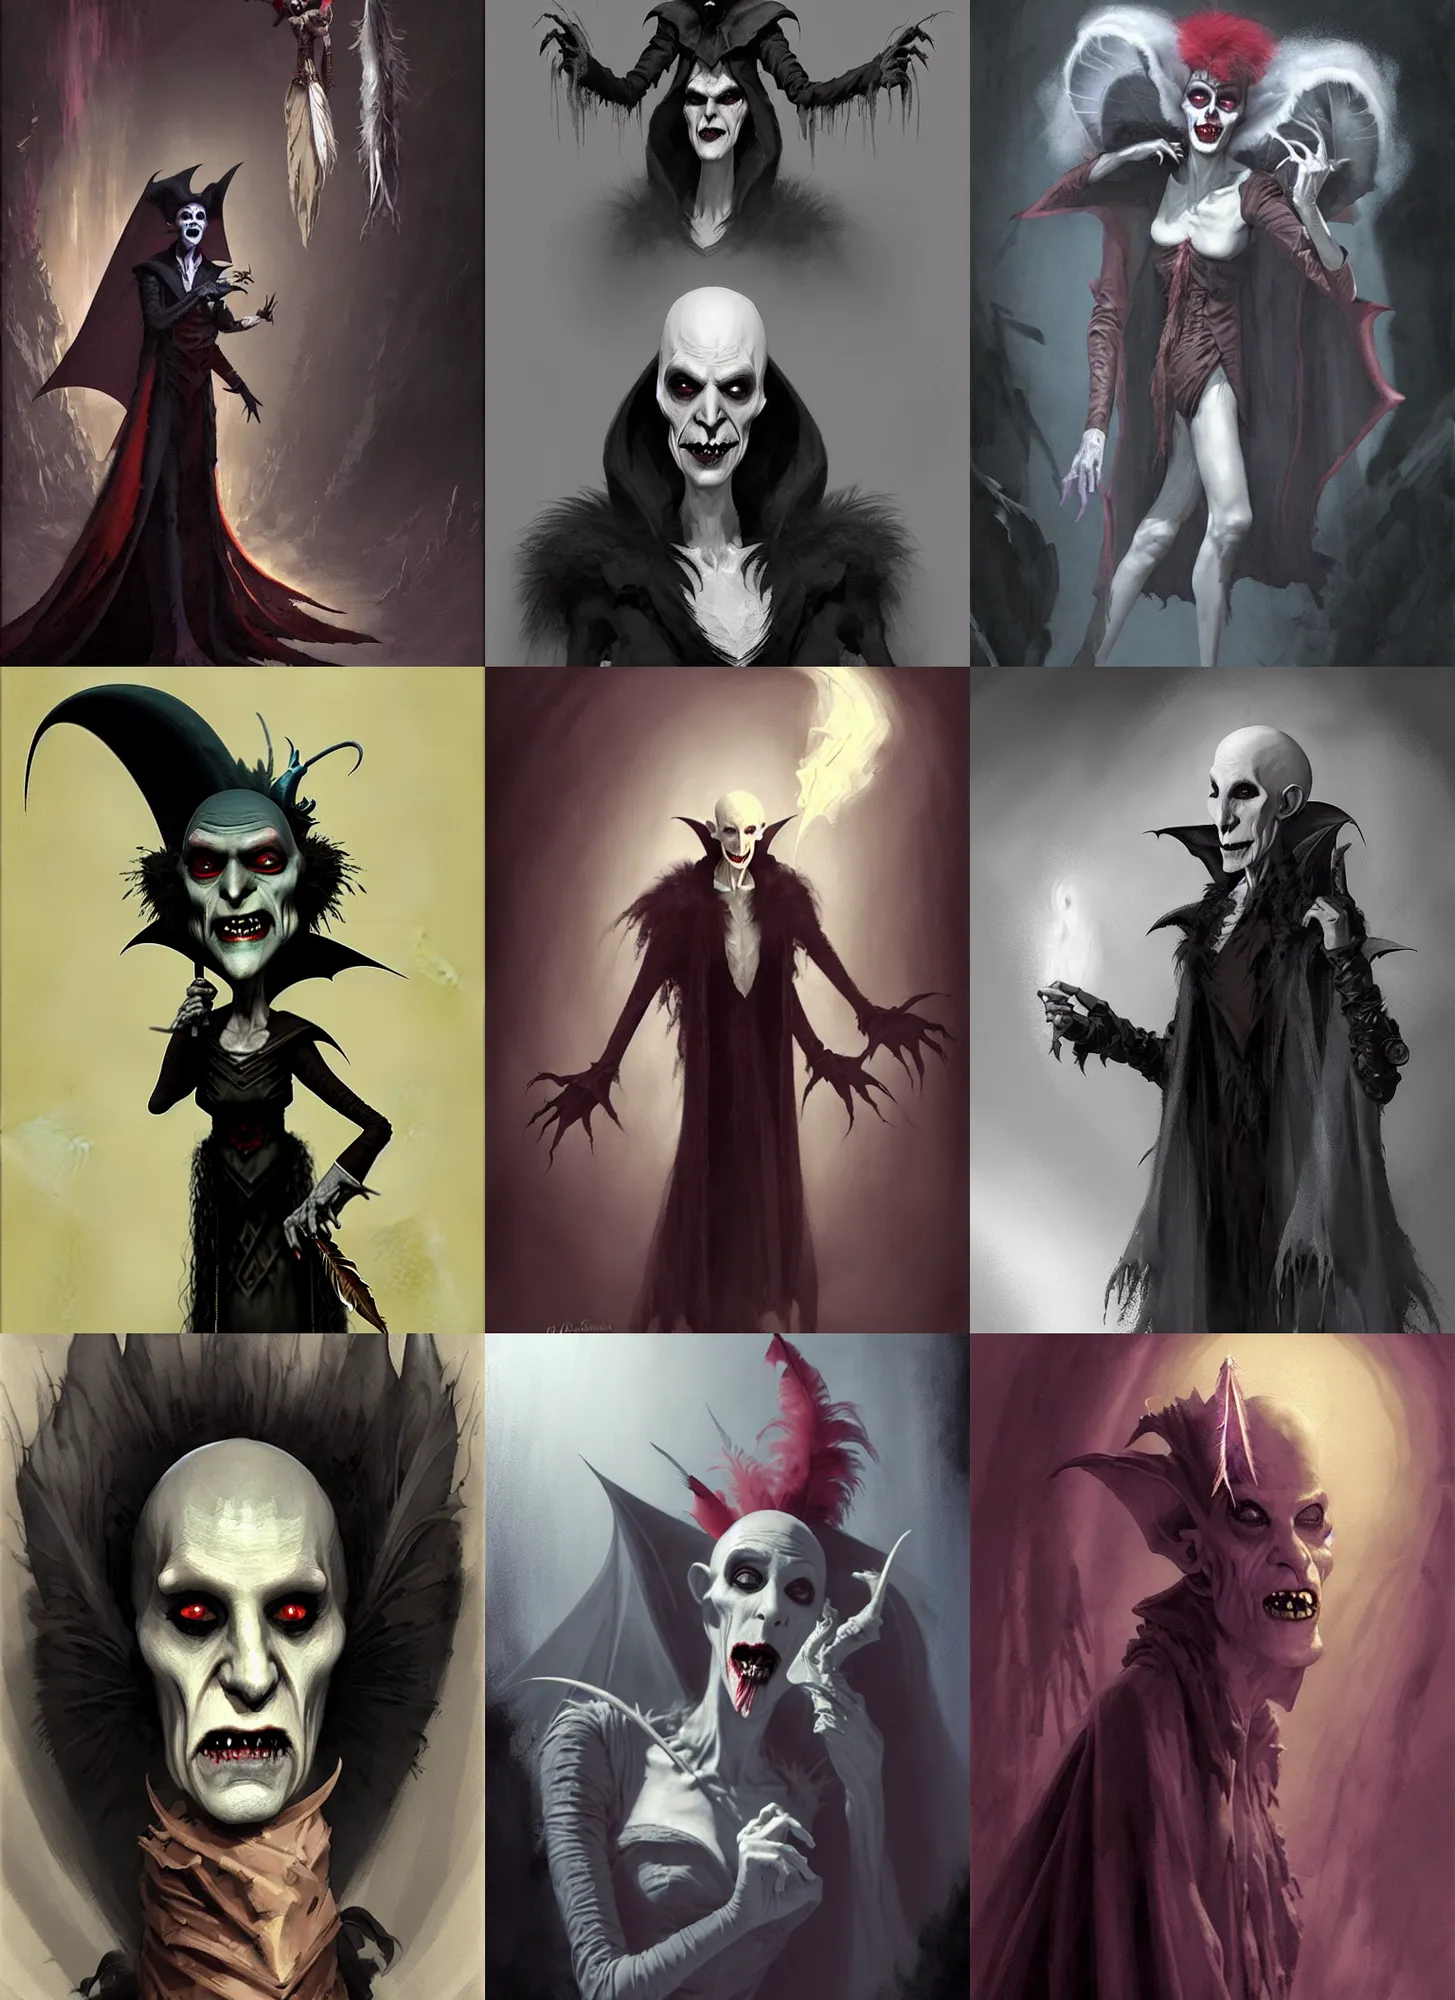 Prompt: dnd character concept art by craig mullins and tom bagshaw of nosferatu undead vampire flapper nosferatu old aged run down drag queen. ancient, old. bad wig, ruined makeup, feather boa. singing, mysterious, theater, stage, spotlights, smoke, darkness, shadows, fantasy.